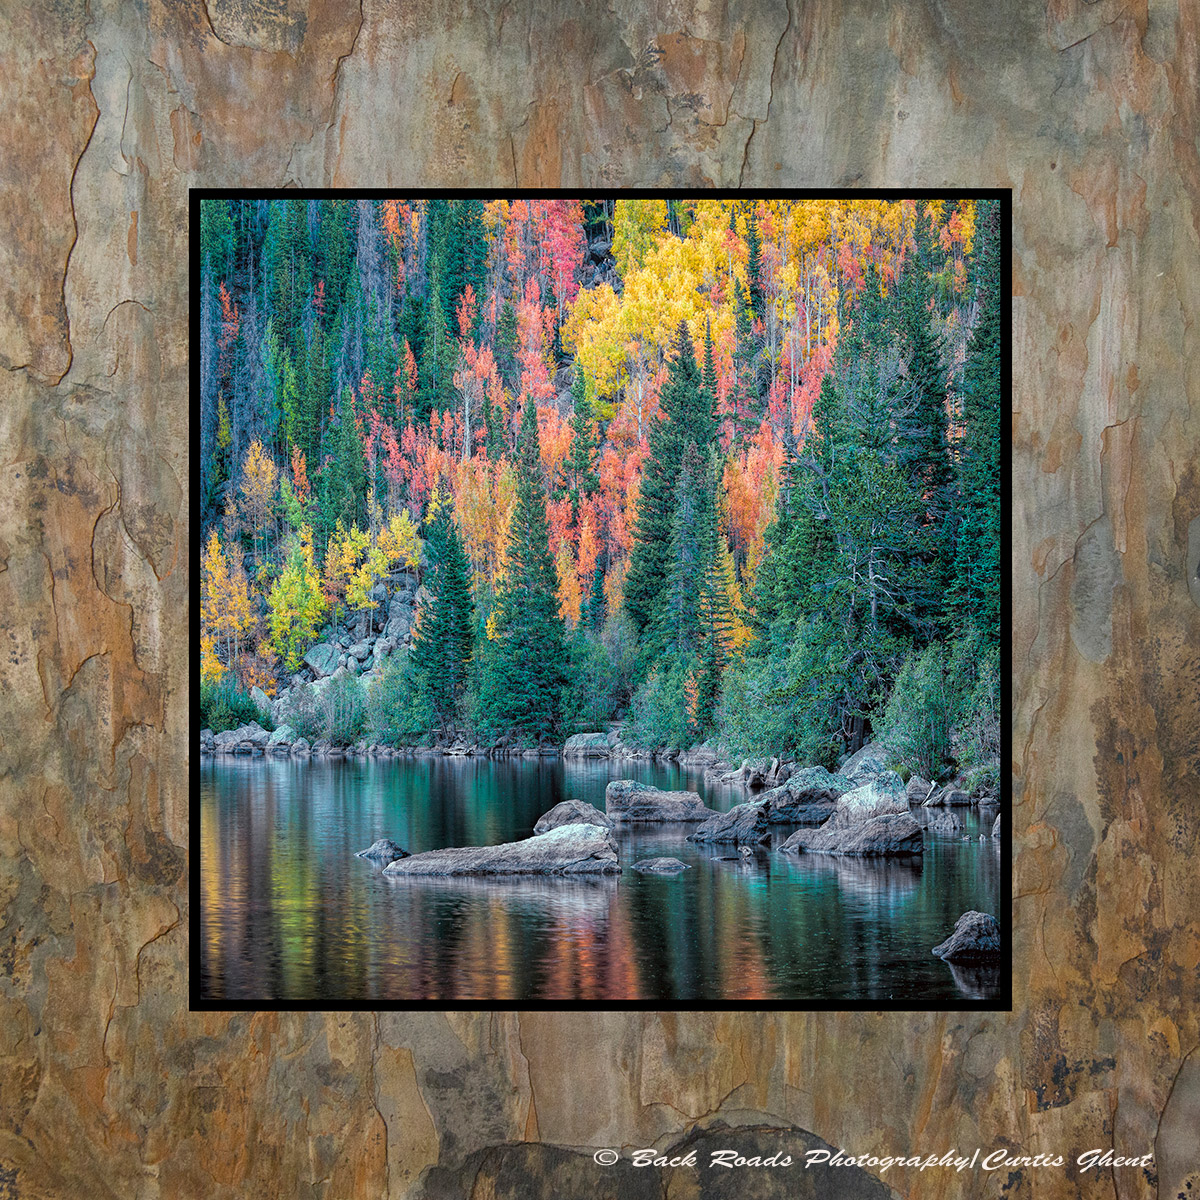 Images are laminated on natural slate with a fade and scratch resistant coating. Natural slate varies in color and texture making...